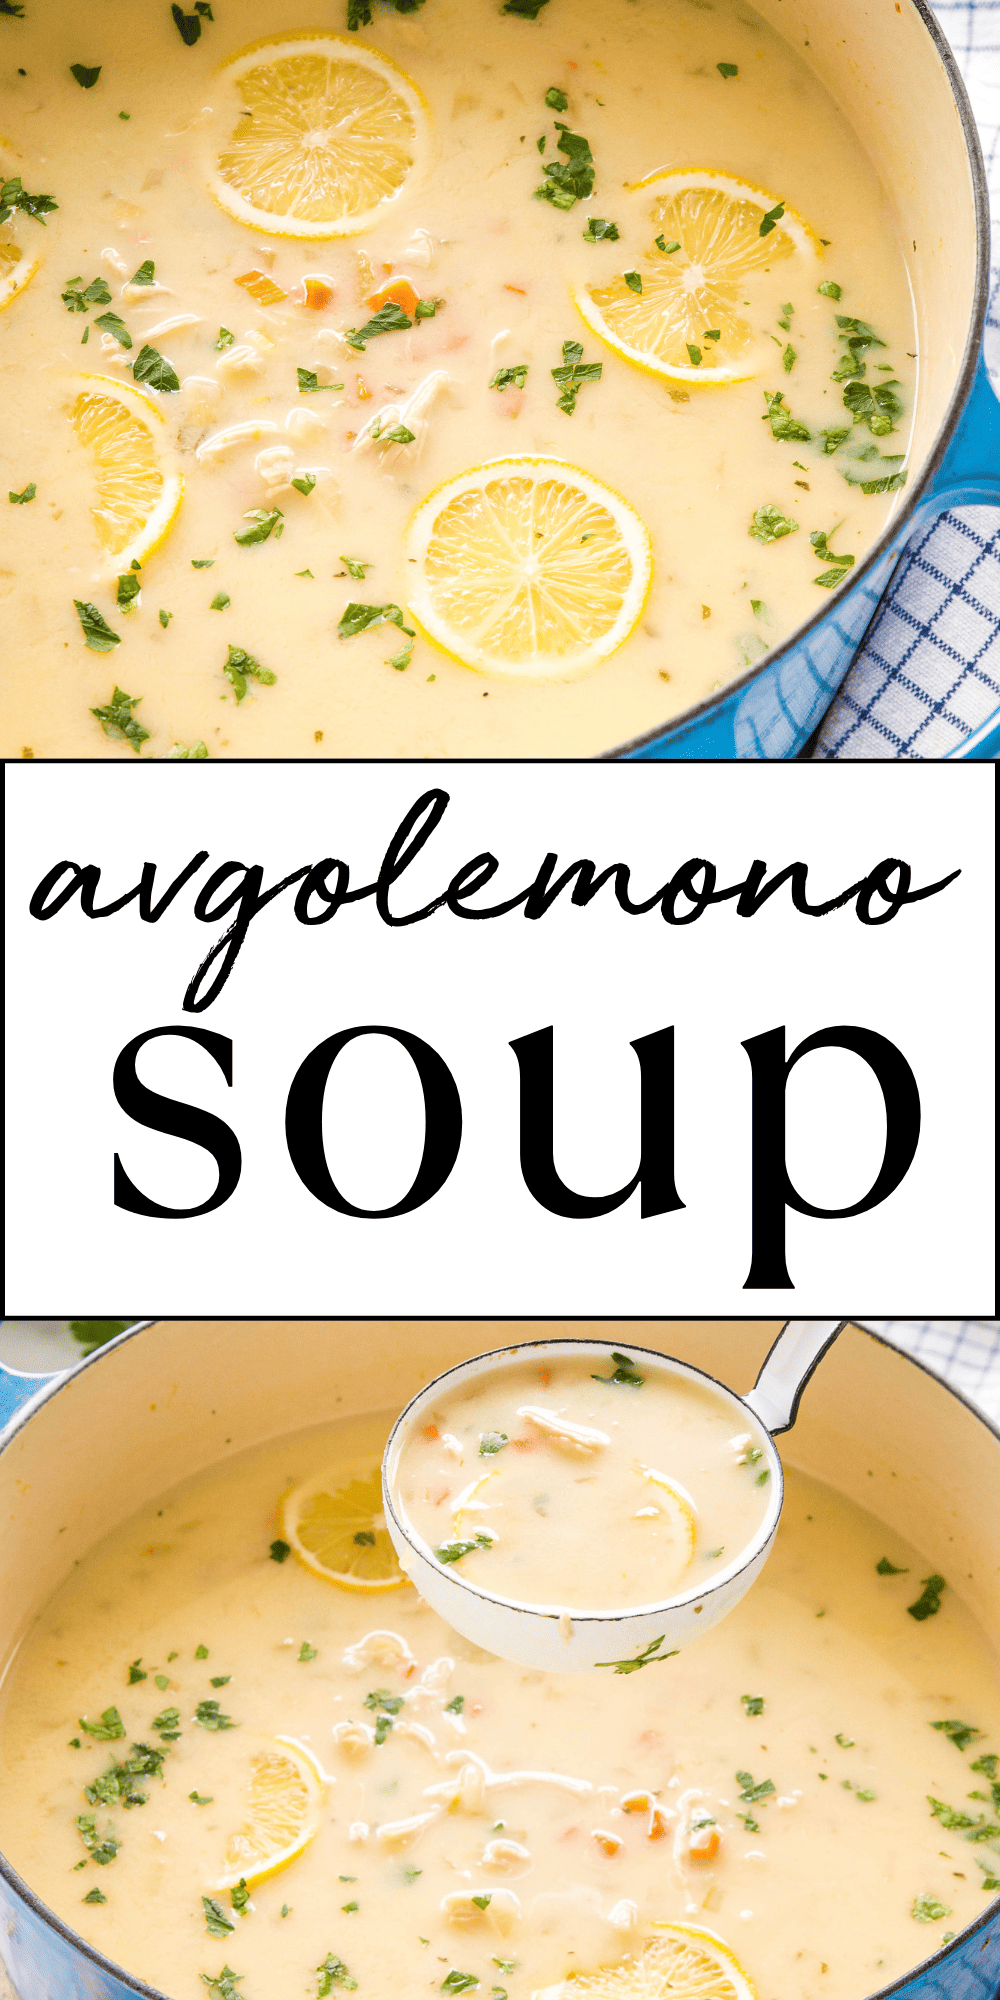 This Avgolemono Soup recipe is a classic Greek lemon chicken soup made with orzo pasta or rice. Made with no dairy, this lemon chicken orzo soup is thickened with eggs and made with poached chicken and fresh veggies! Recipe from thebusybaker.ca! #avgolemonosoup #avgolemono #lemonchickenorzosoup #lemonchicken #orzo #rice #greeksoup #greeklemonchickensoup #easysouprecipe #healthysoup #dairyfree via @busybakerblog